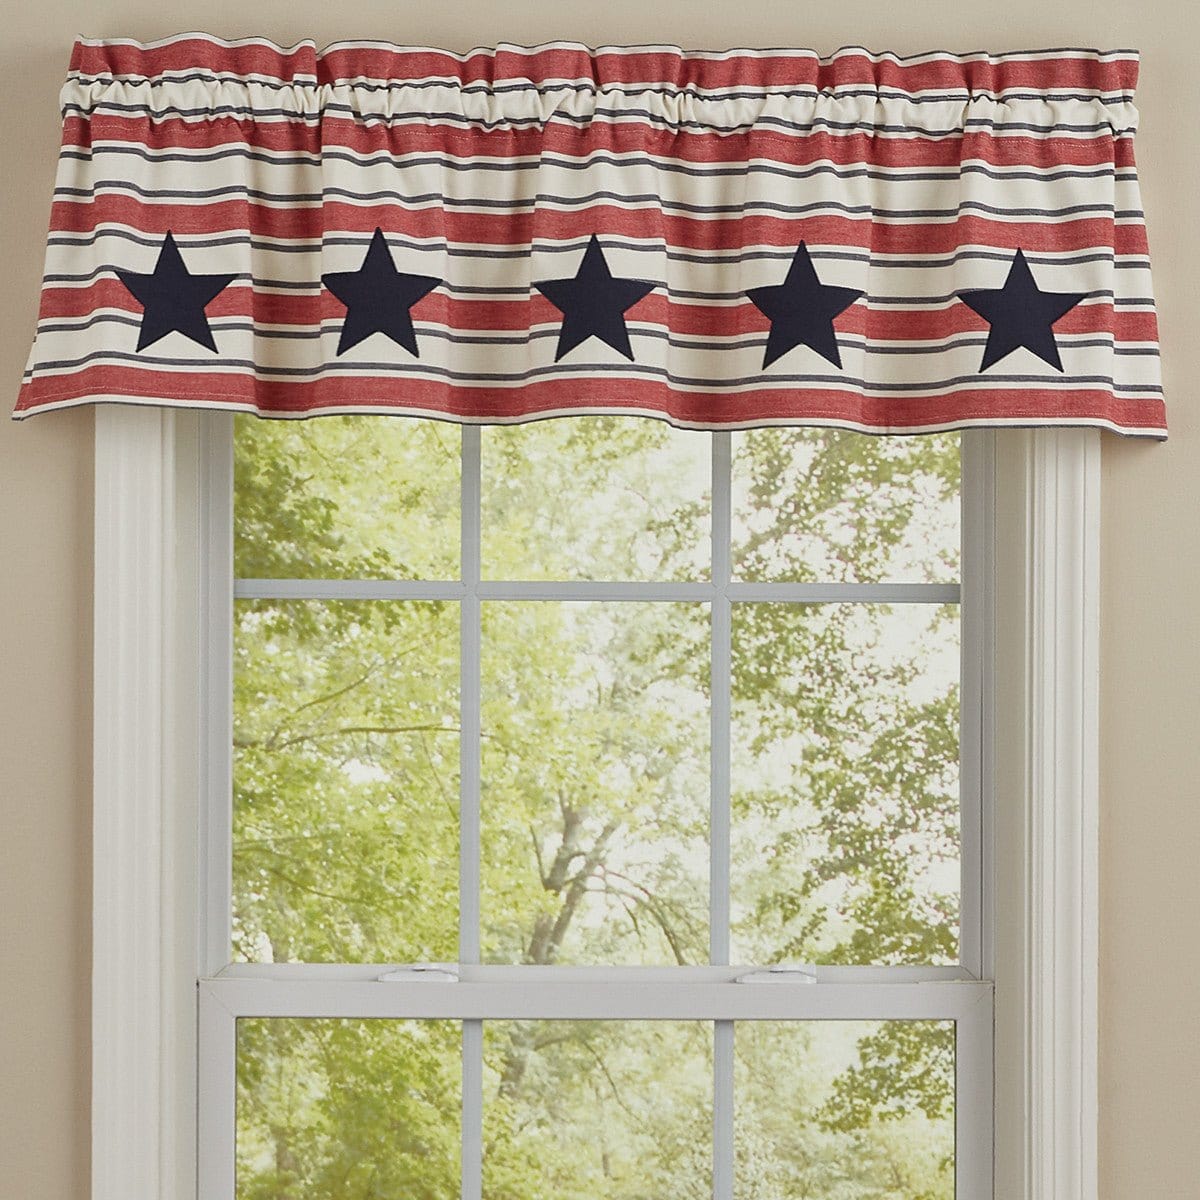 Patch Stars And Stripes Valance Lined-Park Designs-The Village Merchant